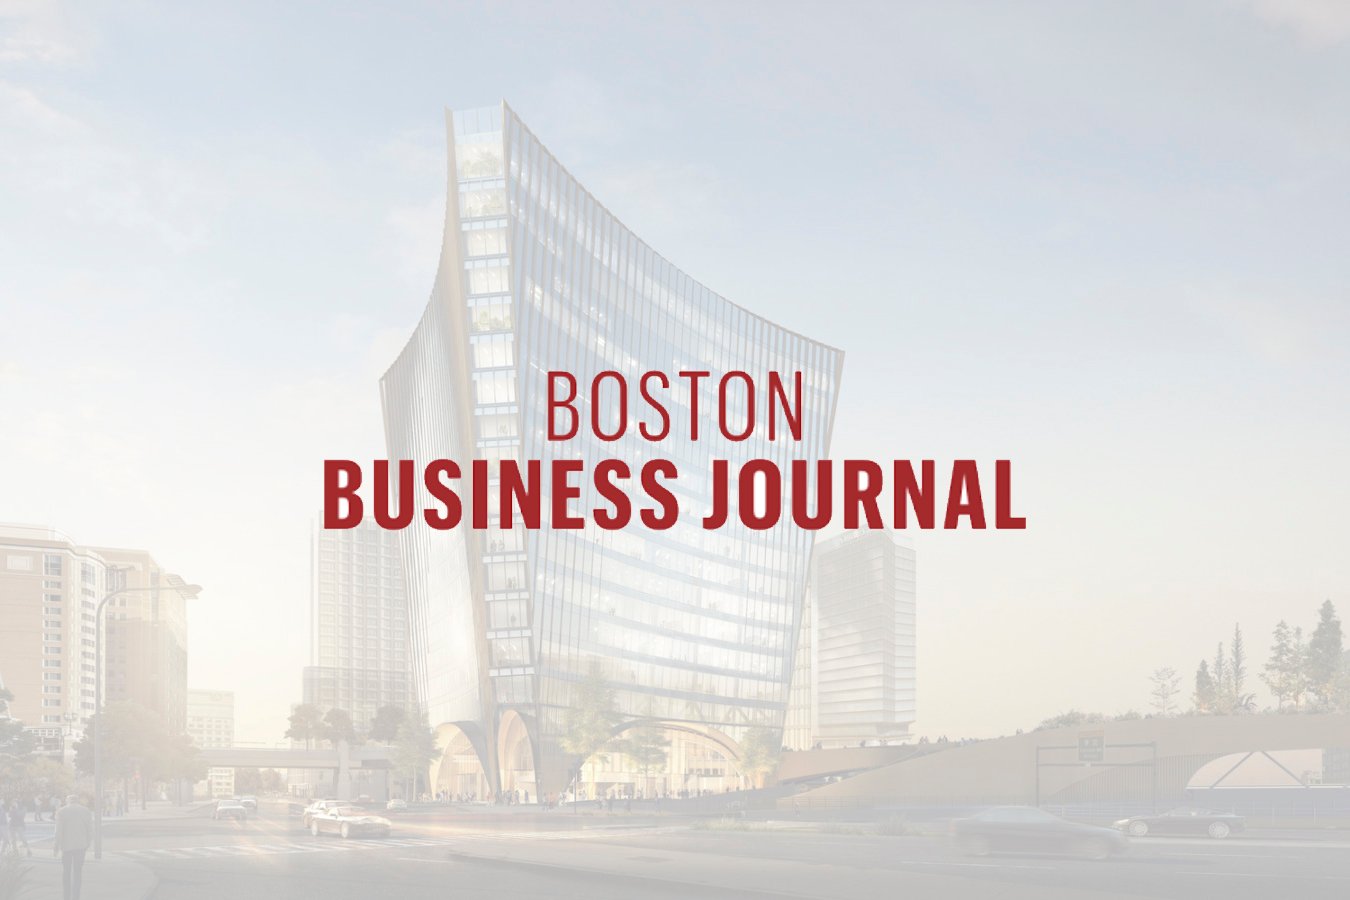 Boston Business Journal: Developer looks to swap office space for lab in new Seaport tower